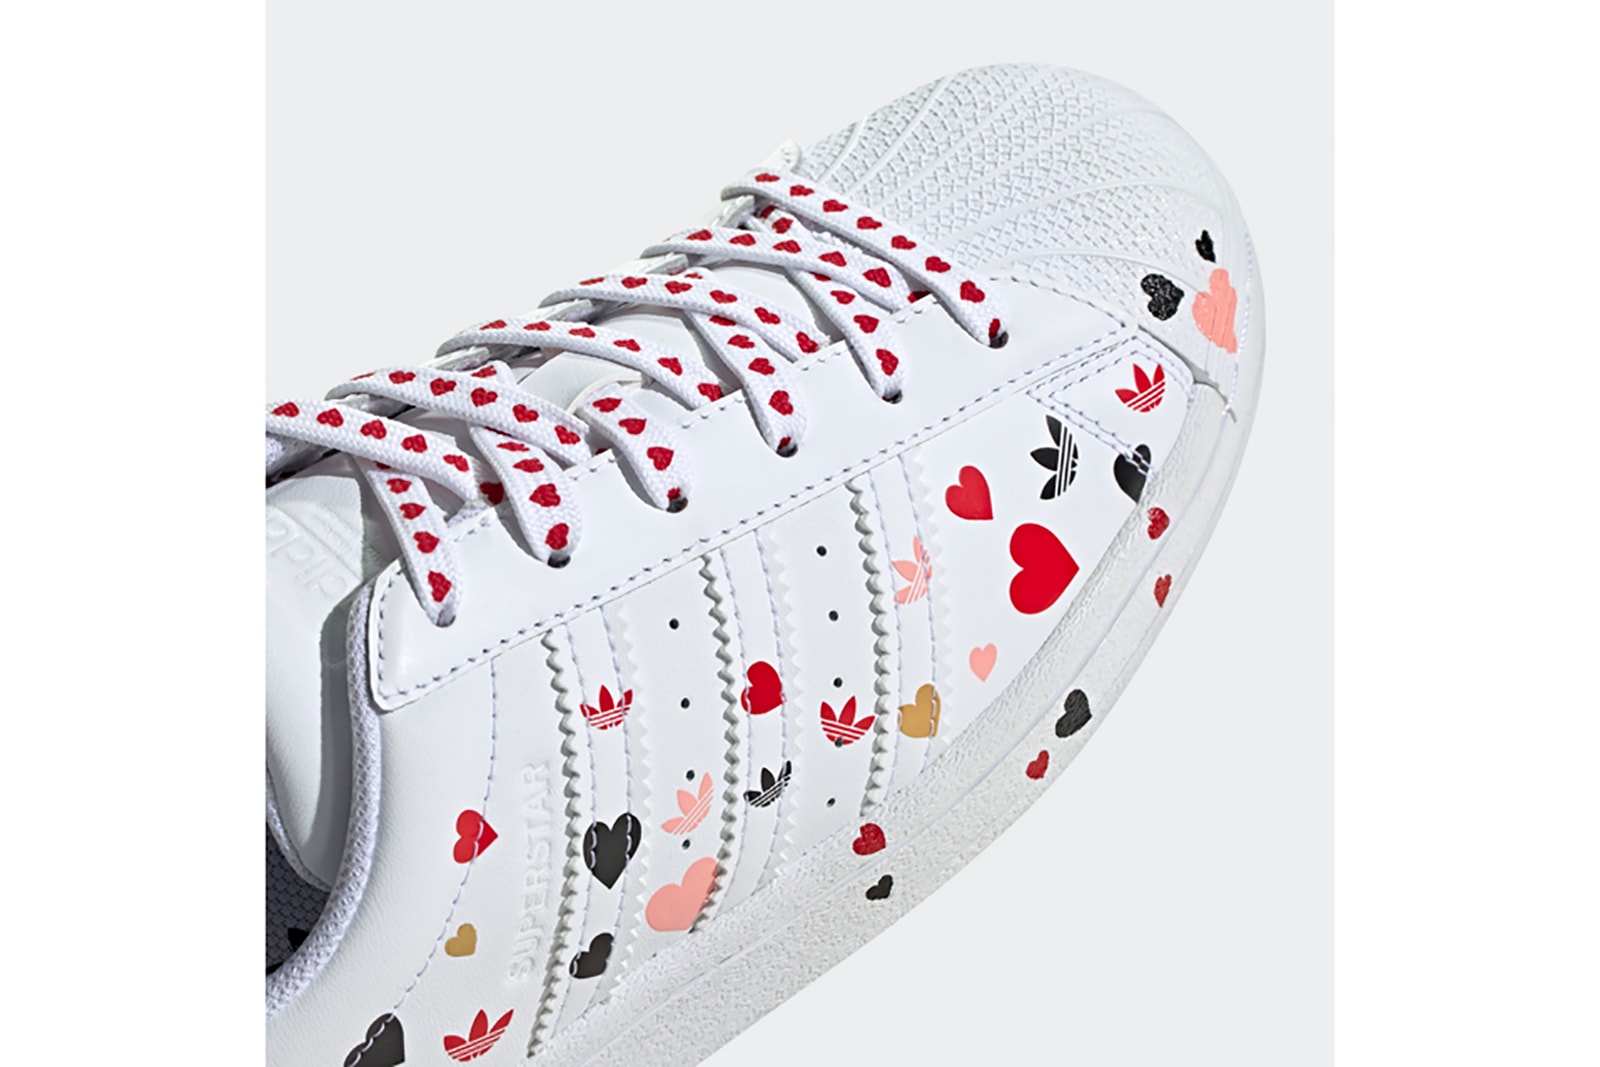 domingo Definitivo Supone adidas' Valentine's Day Sneaker Collection Release | Hypebae